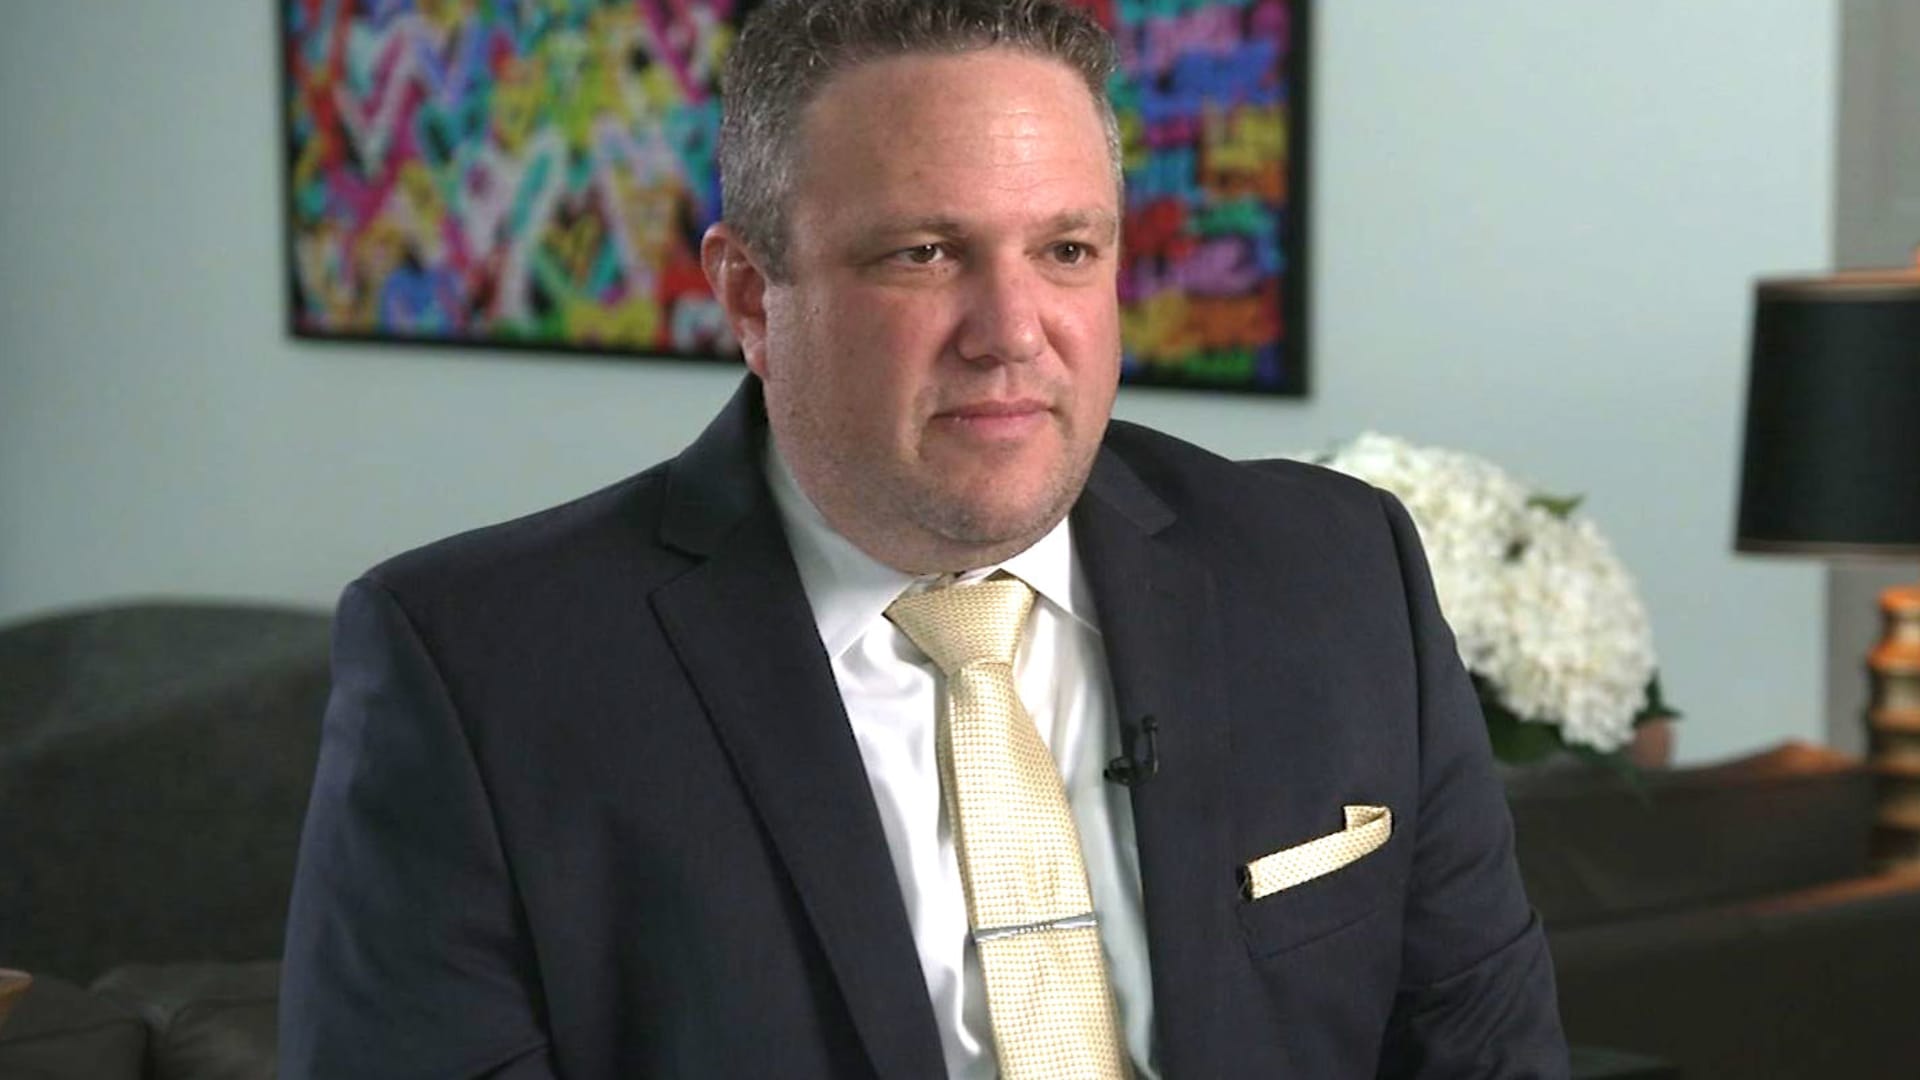 David Silver is an attorney specializing in cryptocurrency.